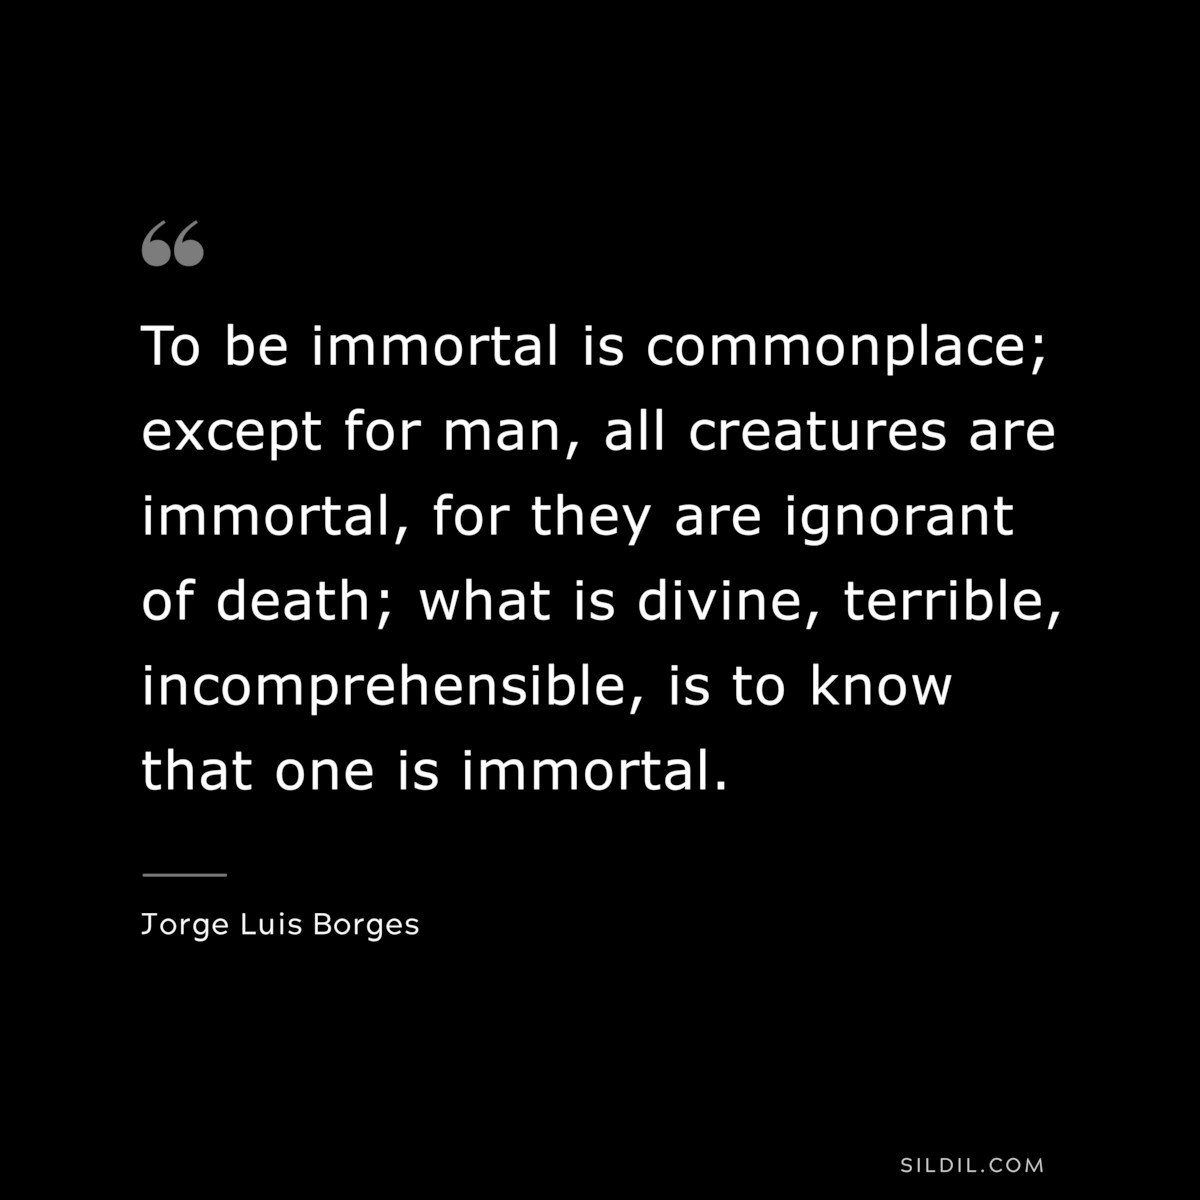 To be immortal is commonplace; except for man, all creatures are immortal, for they are ignorant of death; what is divine, terrible, incomprehensible, is to know that one is immortal. ― Jorge Luis Borges